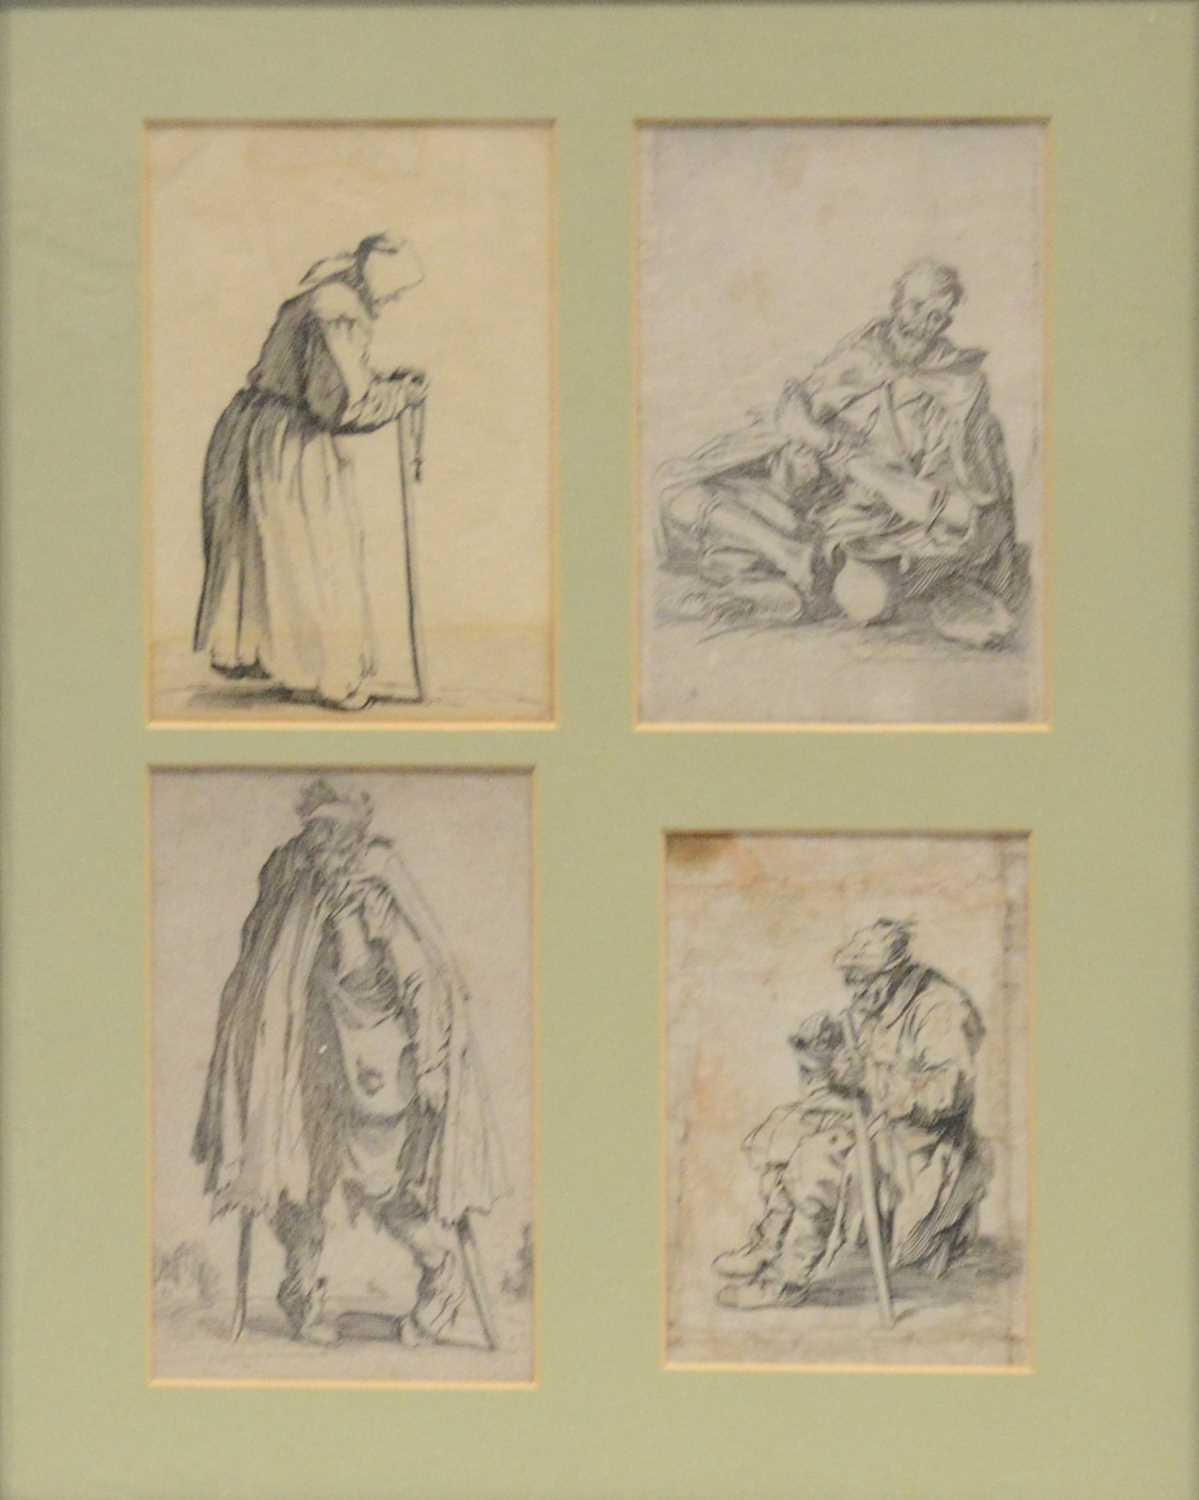 After Jacques Callot, various prints from Les Gueux series - Image 3 of 4